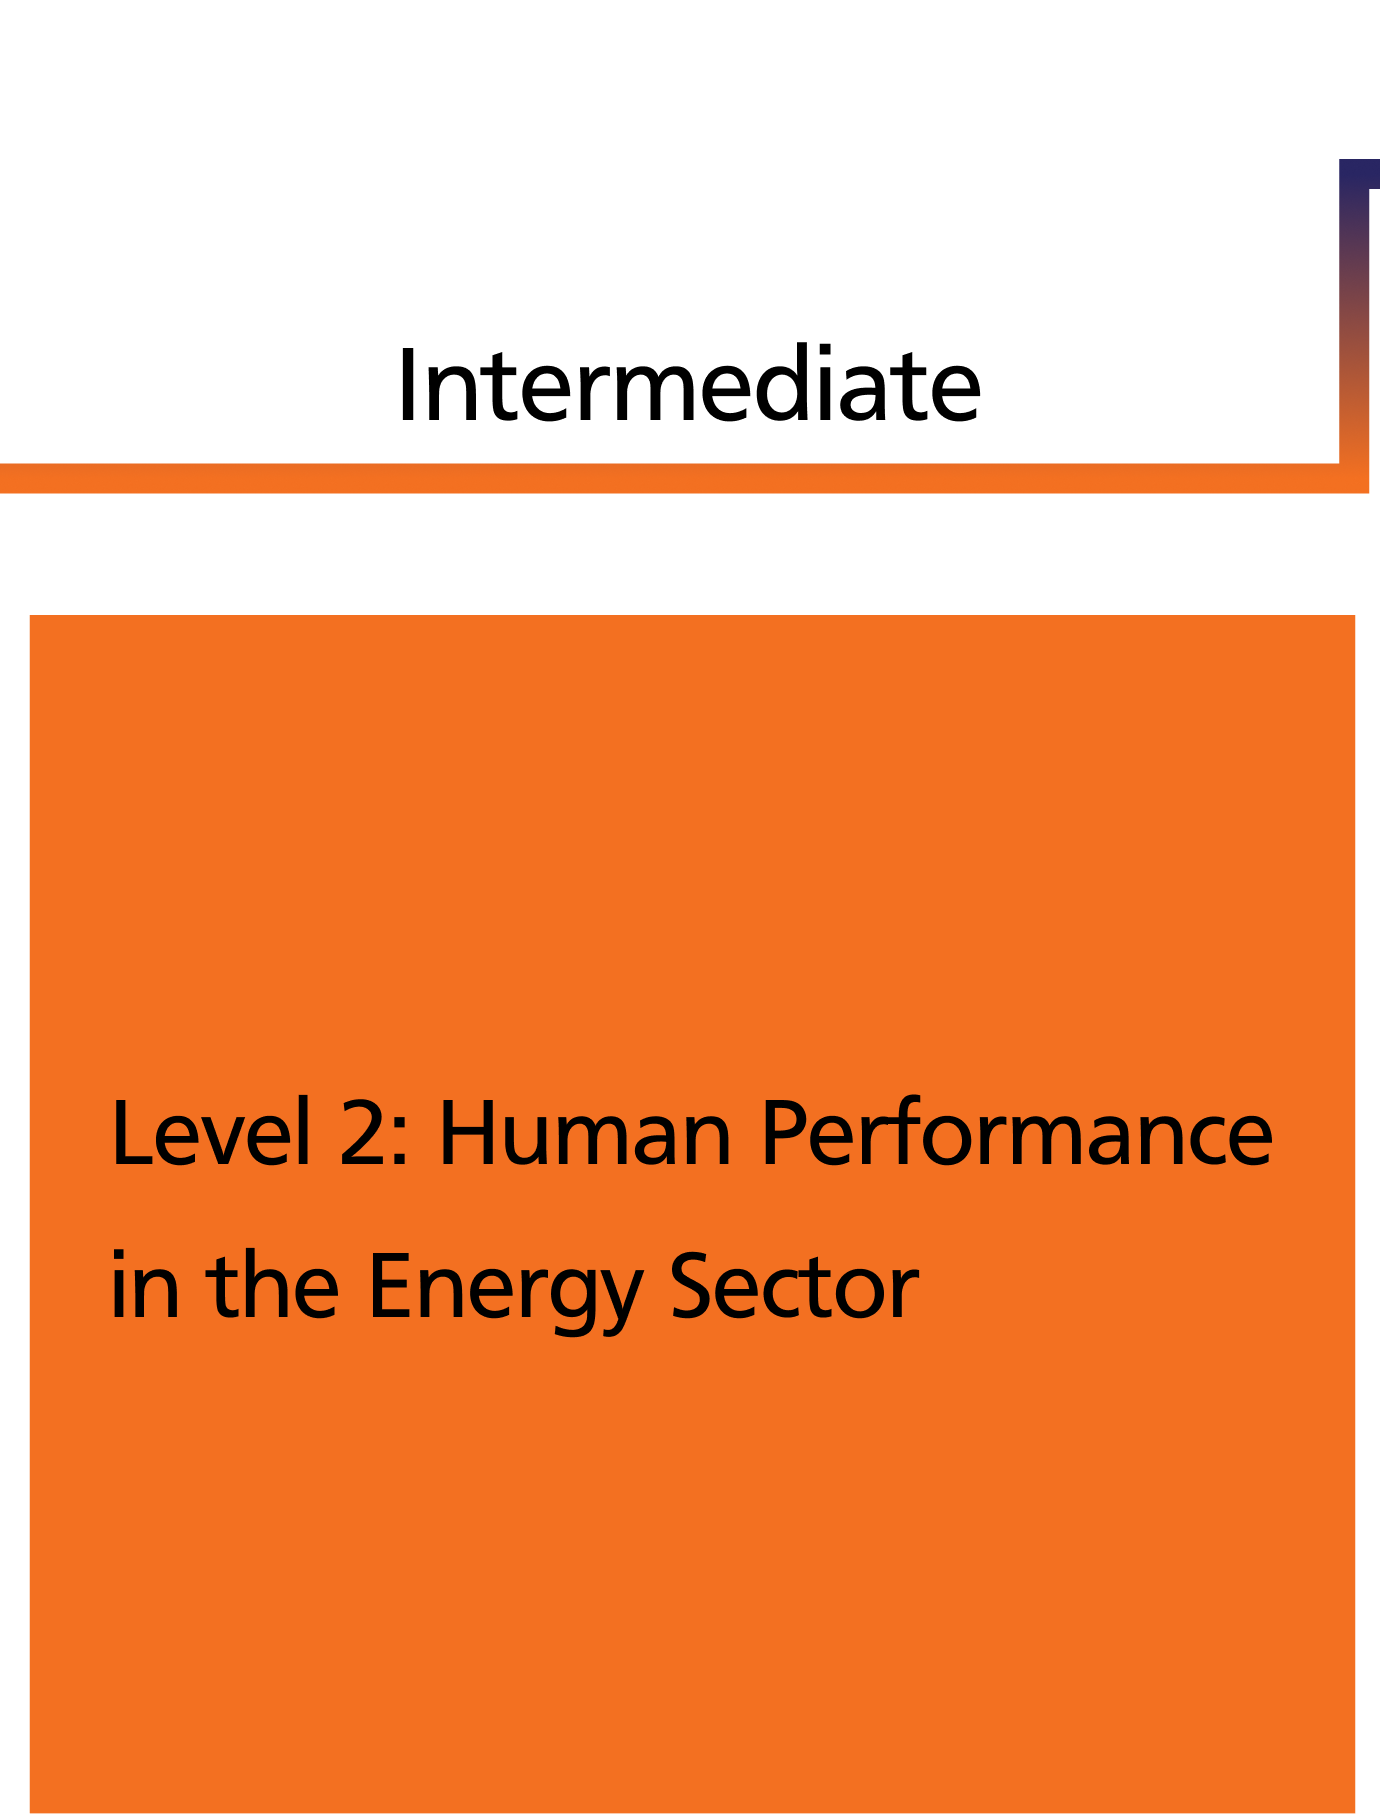 Level 2: Human Performance in the Energy Sector